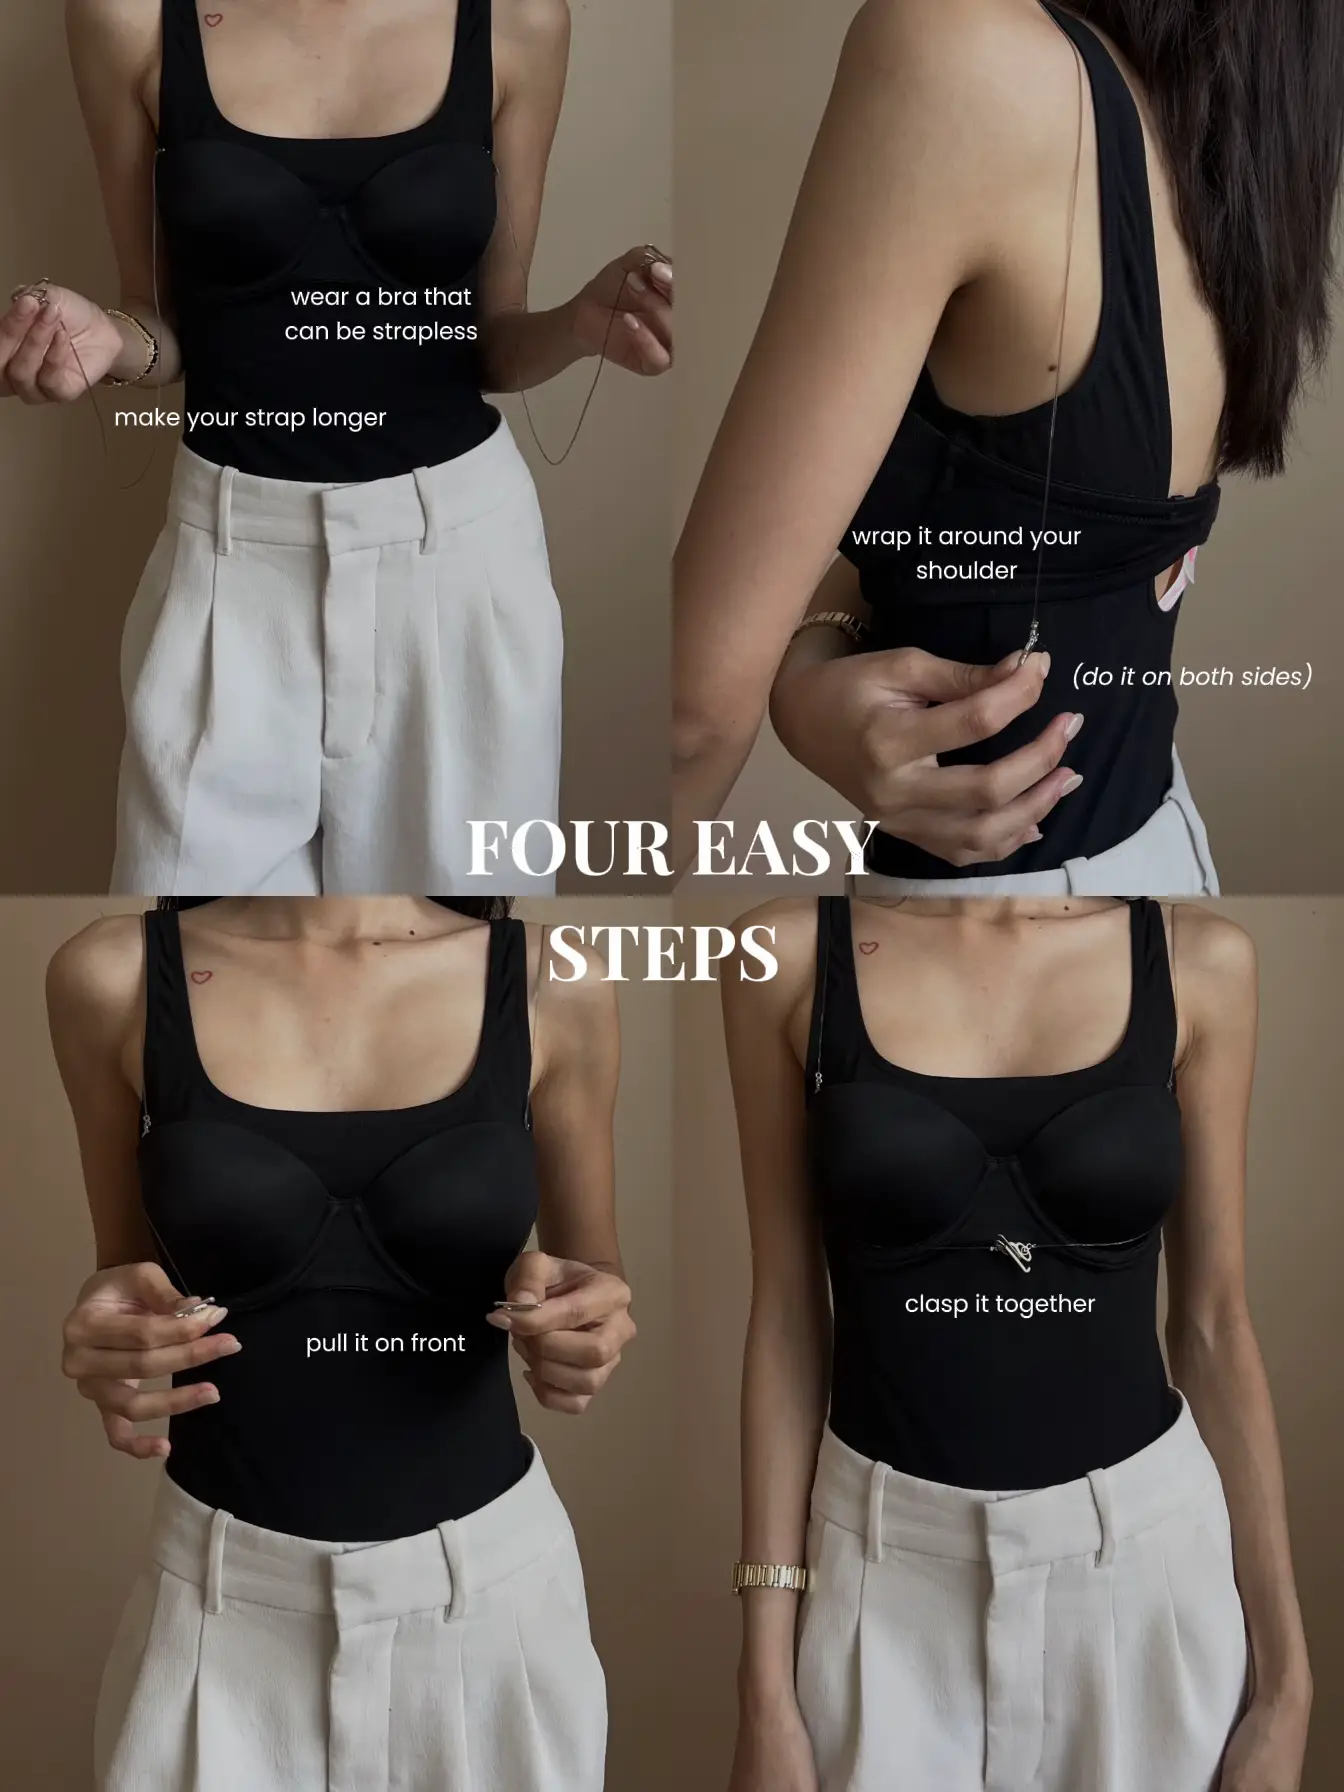 How to Avoid Showing Your Bra When Wearing a Shirt